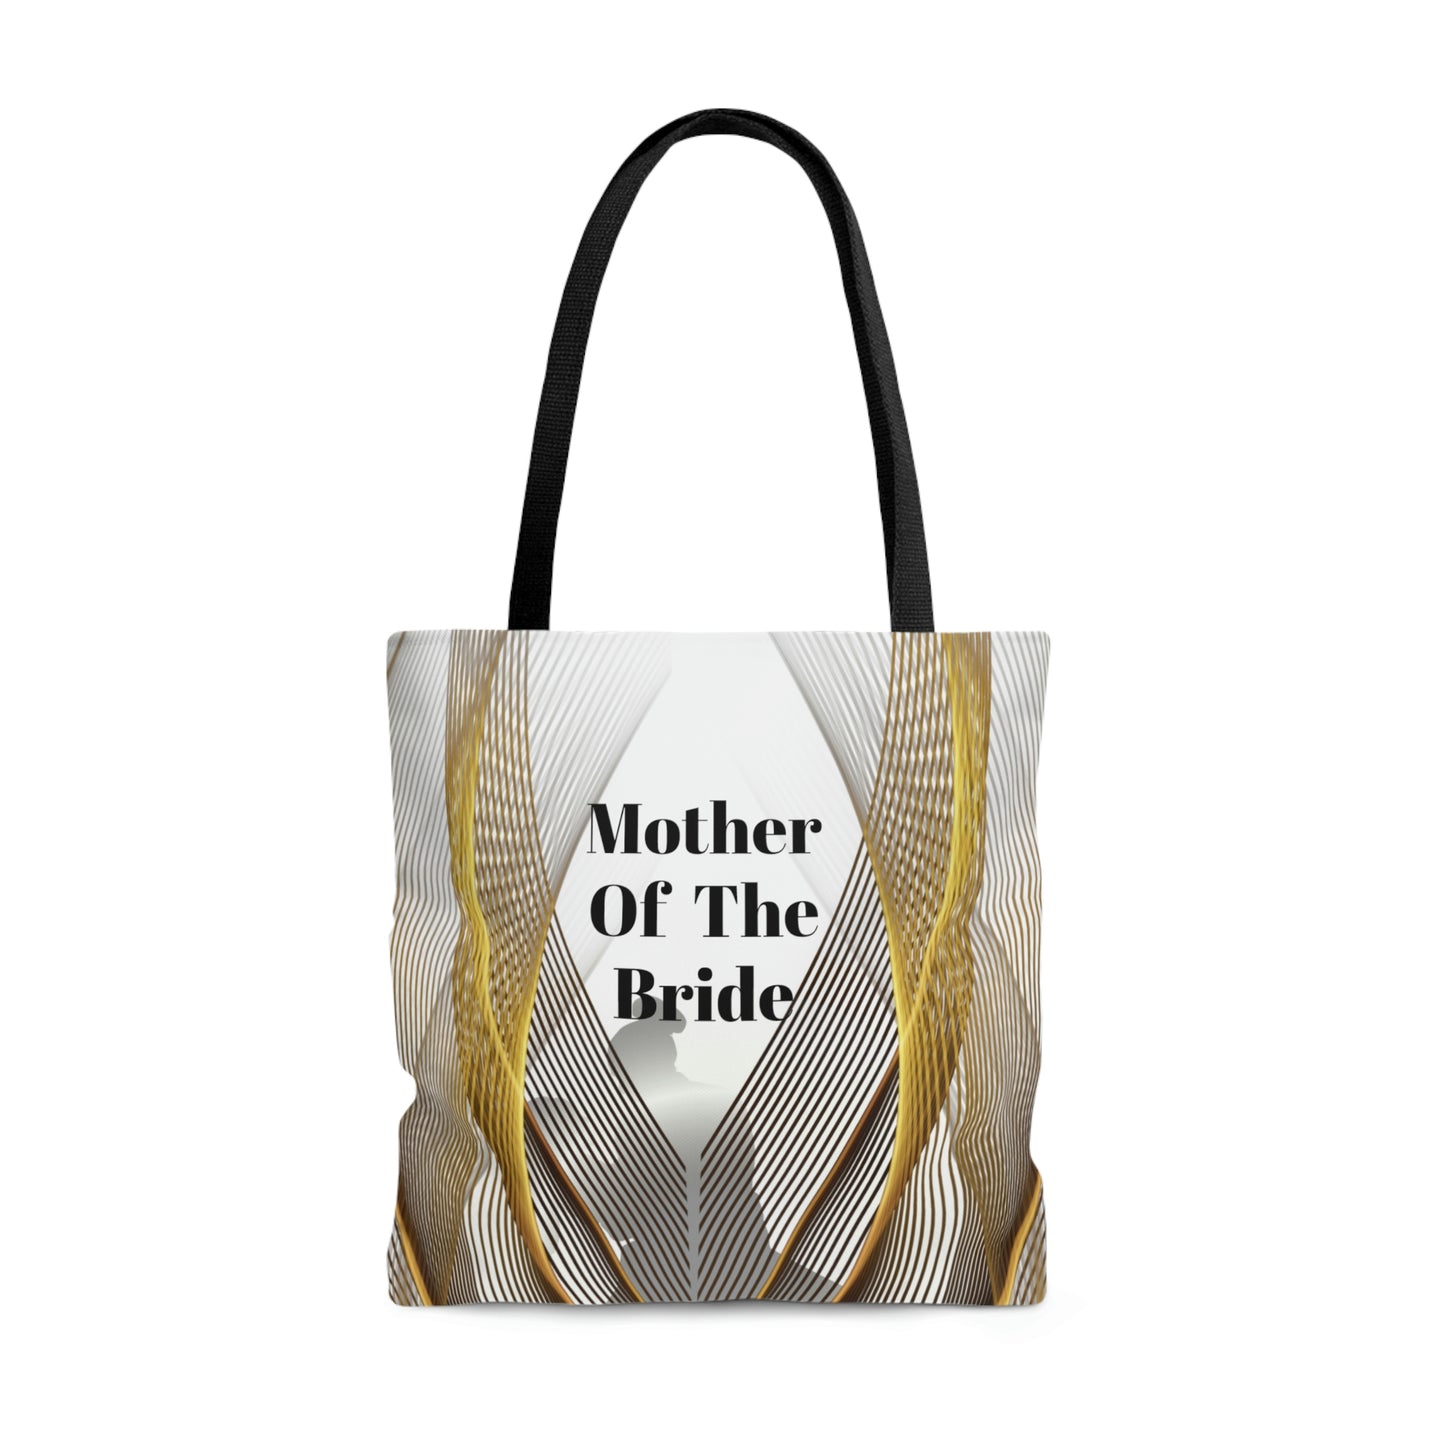 Mother Of The Bride Gift Bag | White Tote | Practical Wedding Gift | Bridal Shower Gifts